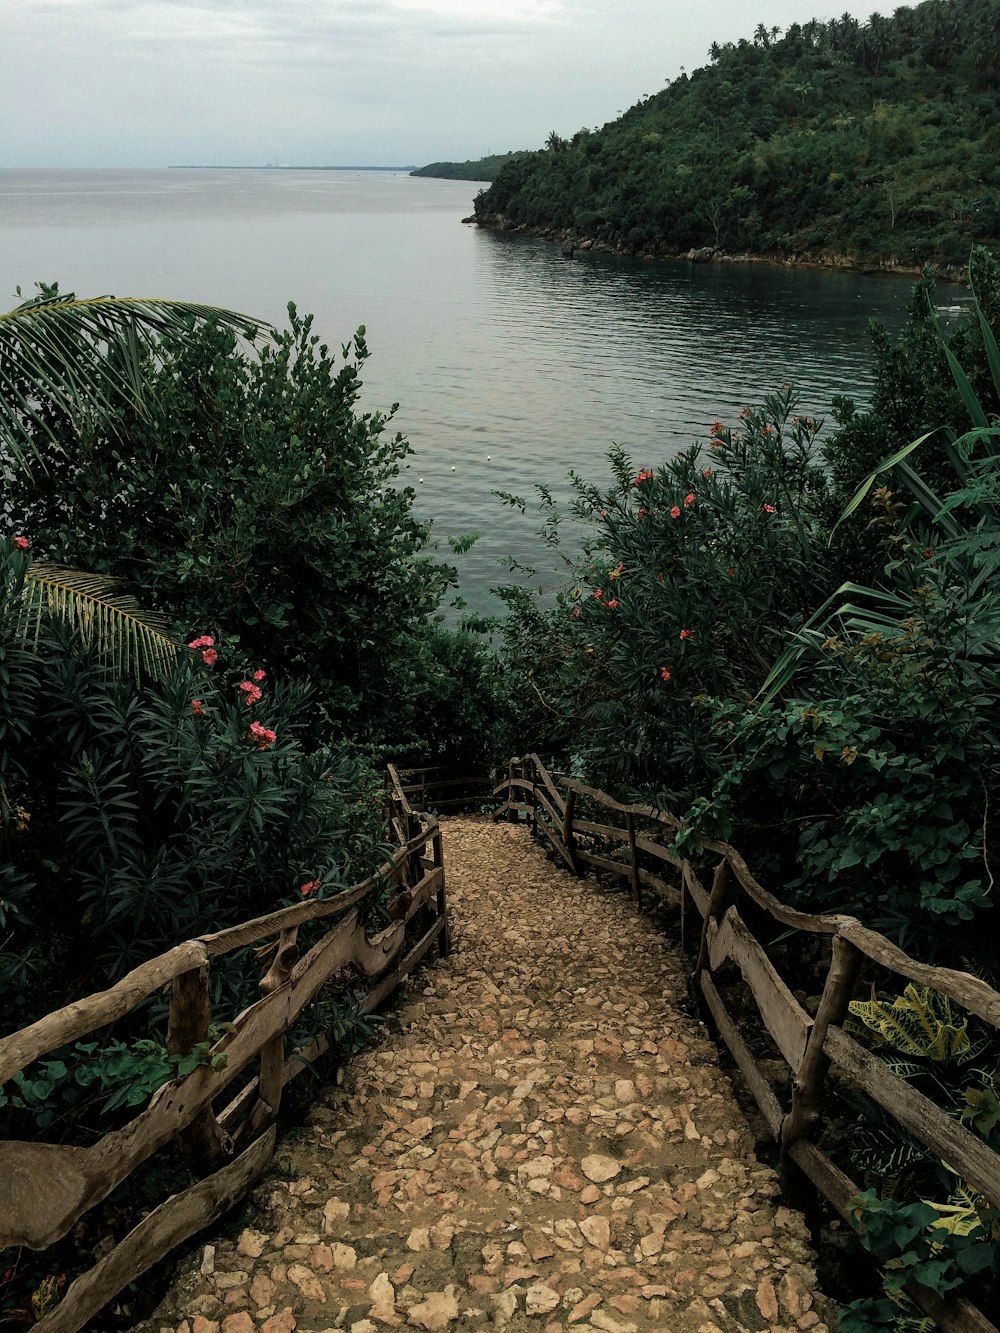 pathway in between plants leading to body of water